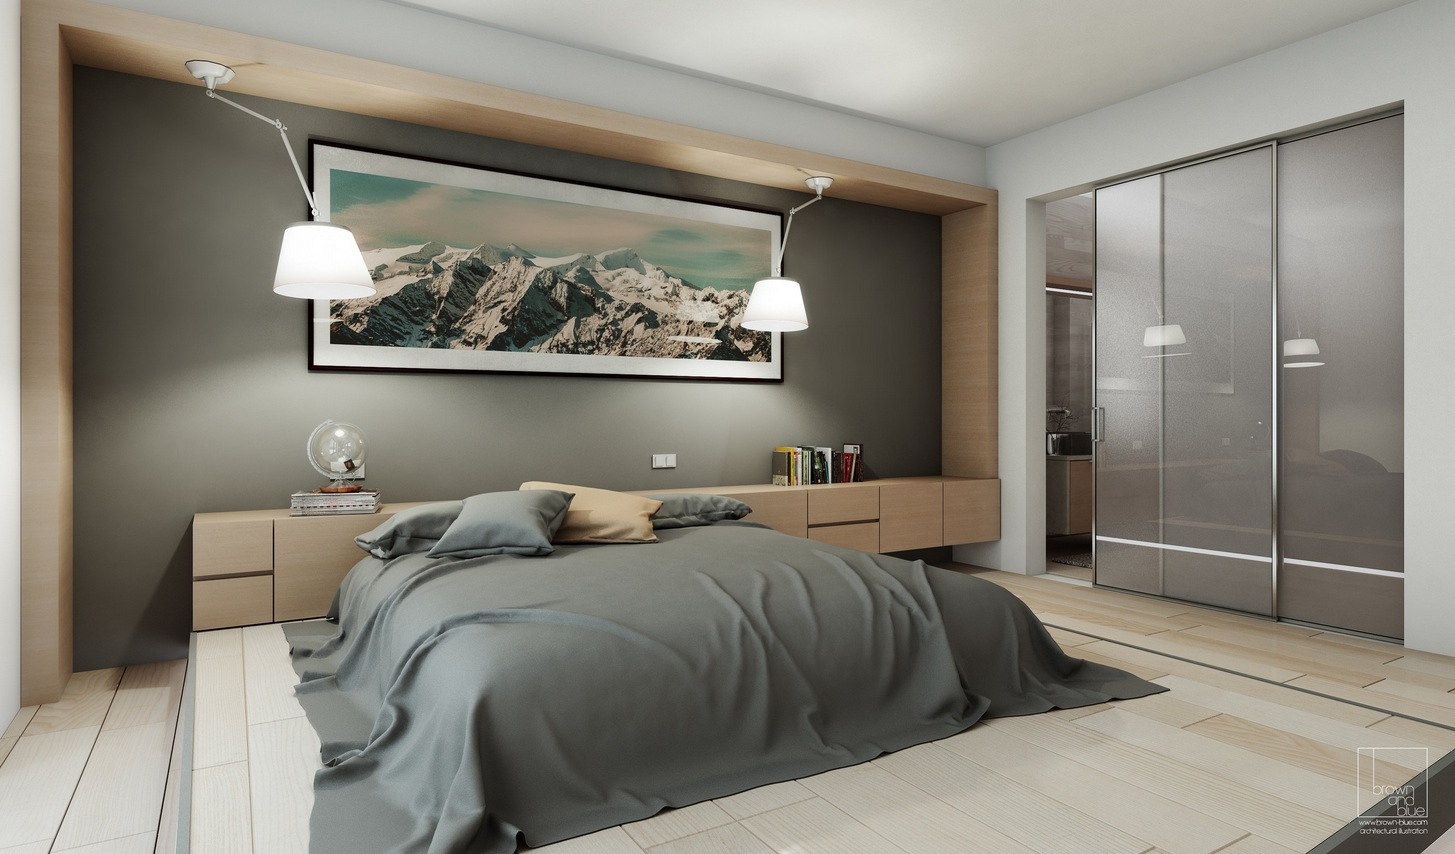 Beautiful bedroom design "width =" 1455 "height =" 854 "srcset =" https://mileray.com/wp-content/uploads/2020/05/1588509658_344_A-Variety-of-Gorgeous-Bedroom-Designs-With-Trendy-Wooden-Style.jpeg 1455w, https: / /mileray.com/wp-content/uploads/2016/09/gorgeous-bedroom-design-Brown-Blue-300x176.jpeg 300w, https://mileray.com/wp-content/uploads/2016/09/gorgeous - bedroom-design-Brown-Blue-768x451.jpeg 768w, https://mileray.com/wp-content/uploads/2016/09/gorgeous-bedroom-design-Brown-Blue-1024x601.jpeg 1024w, https: / / mileray.com/wp-content/uploads/2016/09/gorgeous-bedroom-design-Brown-Blue-696x409.jpeg 696w, https://mileray.com/wp-content/uploads/2016/09/gorgeous- bedroom -Design-Brown-Blue-1068x627.jpeg 1068w, https://mileray.com/wp-content/uploads/2016/09/gorgeous-bedroom-design-Brown-Blue-716x420.jpeg 716w "Sizes =" (maximum Width: 1455px) 100vw, 1455px